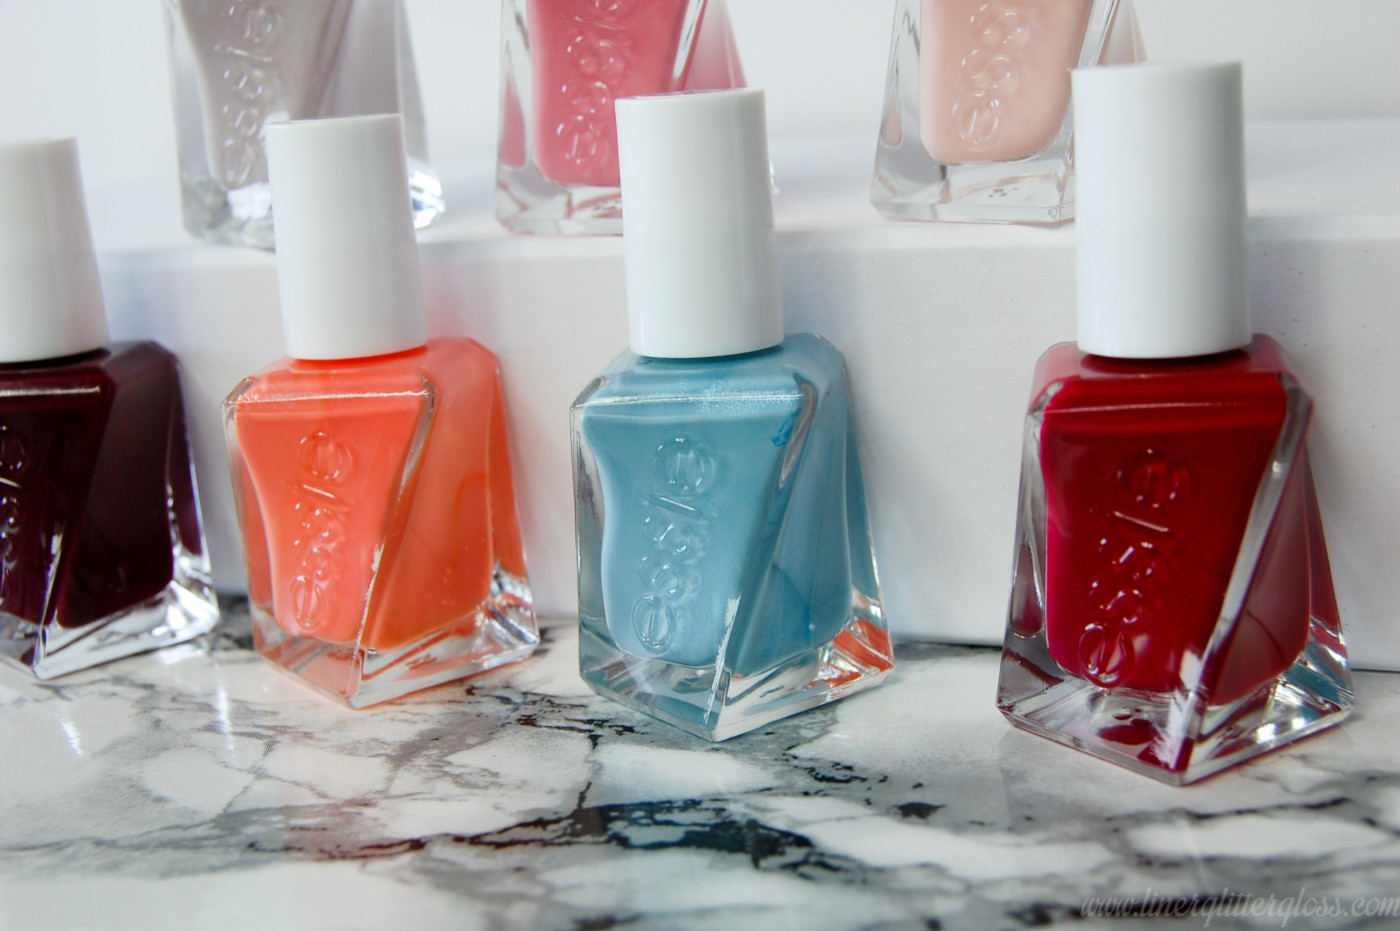 essie gel couture, essie gel nail polish, gel nail polish no lamp, how to make your nail polish last, long lasting nail polish, nail polish that doesn't chip, how to stop nail polish from chipping, new essie polish, essie gel, drugstore gel nail polish, how to make polish last